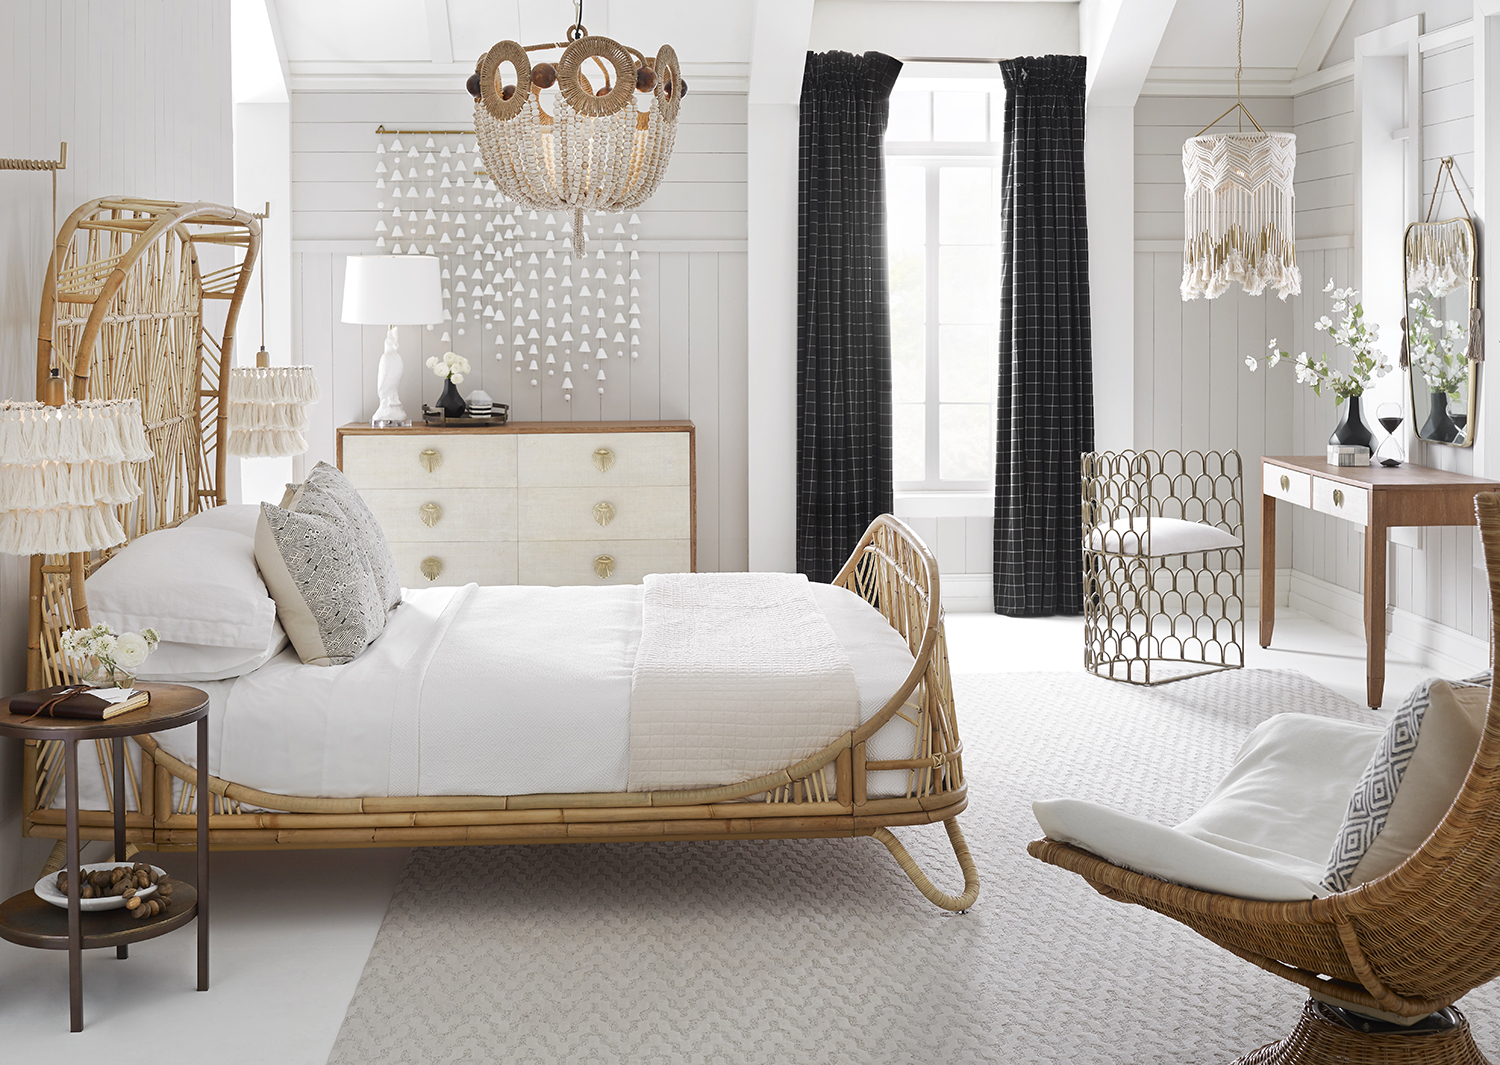 The Ara Bed paired with Justina Blakeney and Selamat home decor completes the bedroom.